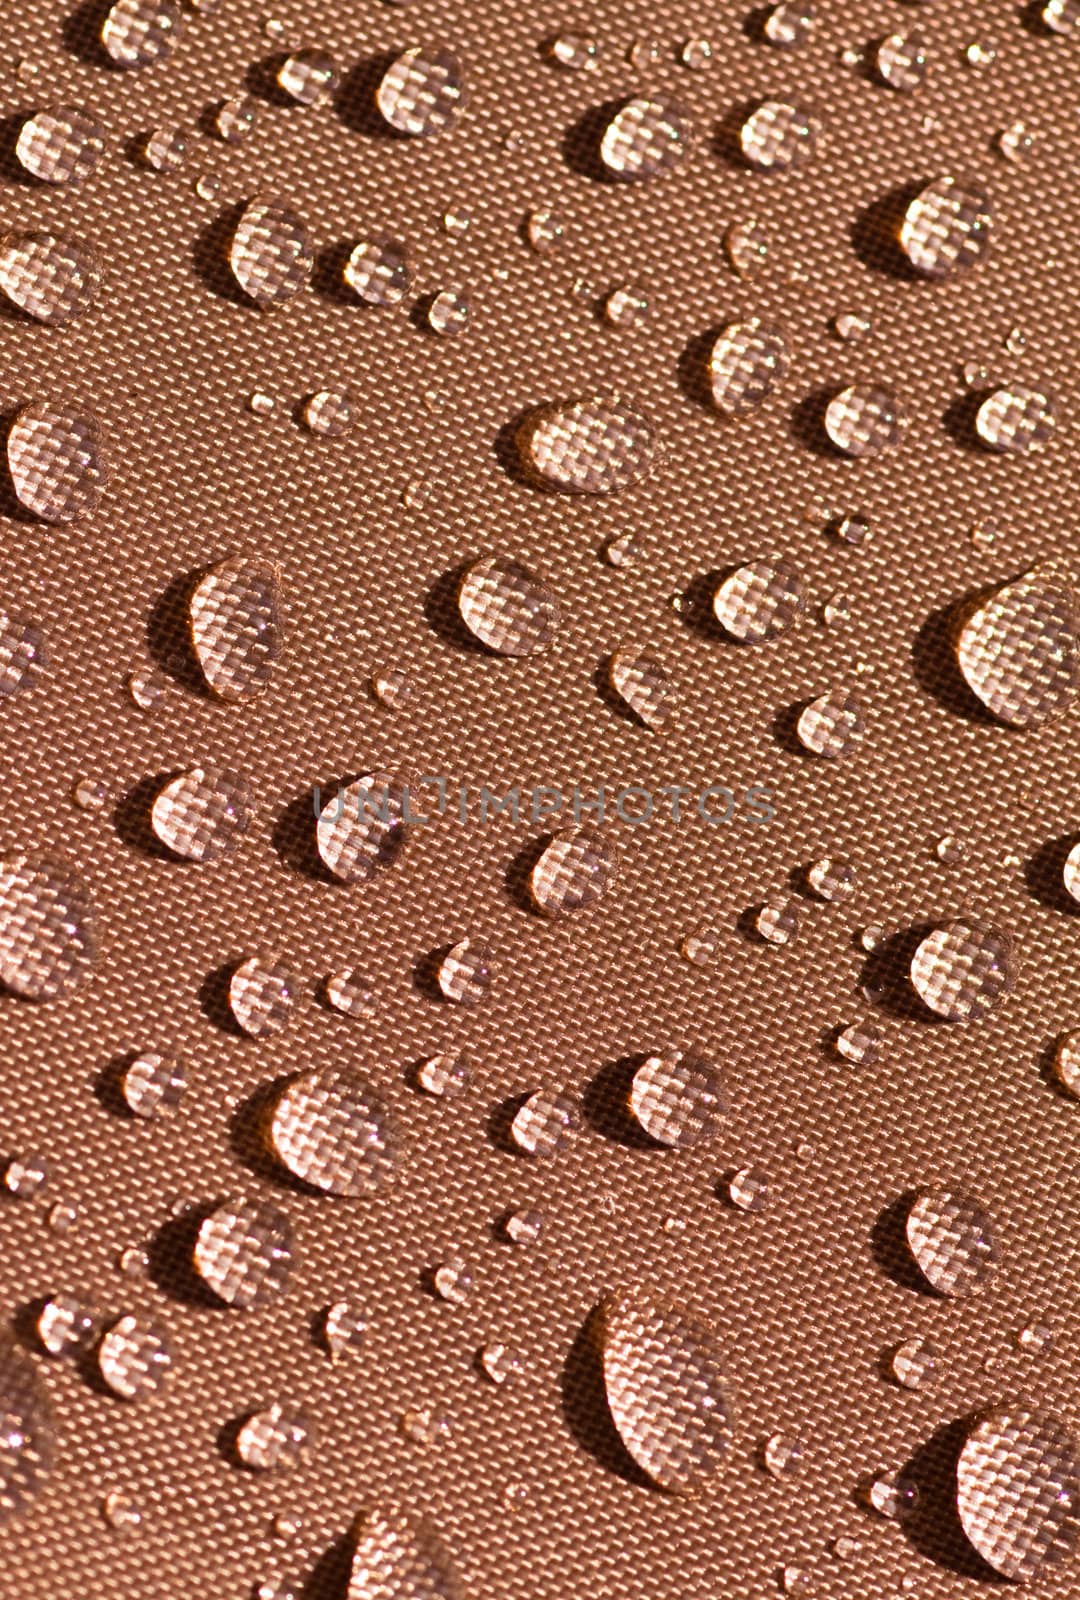 Droplets on brown fabric by PiLens